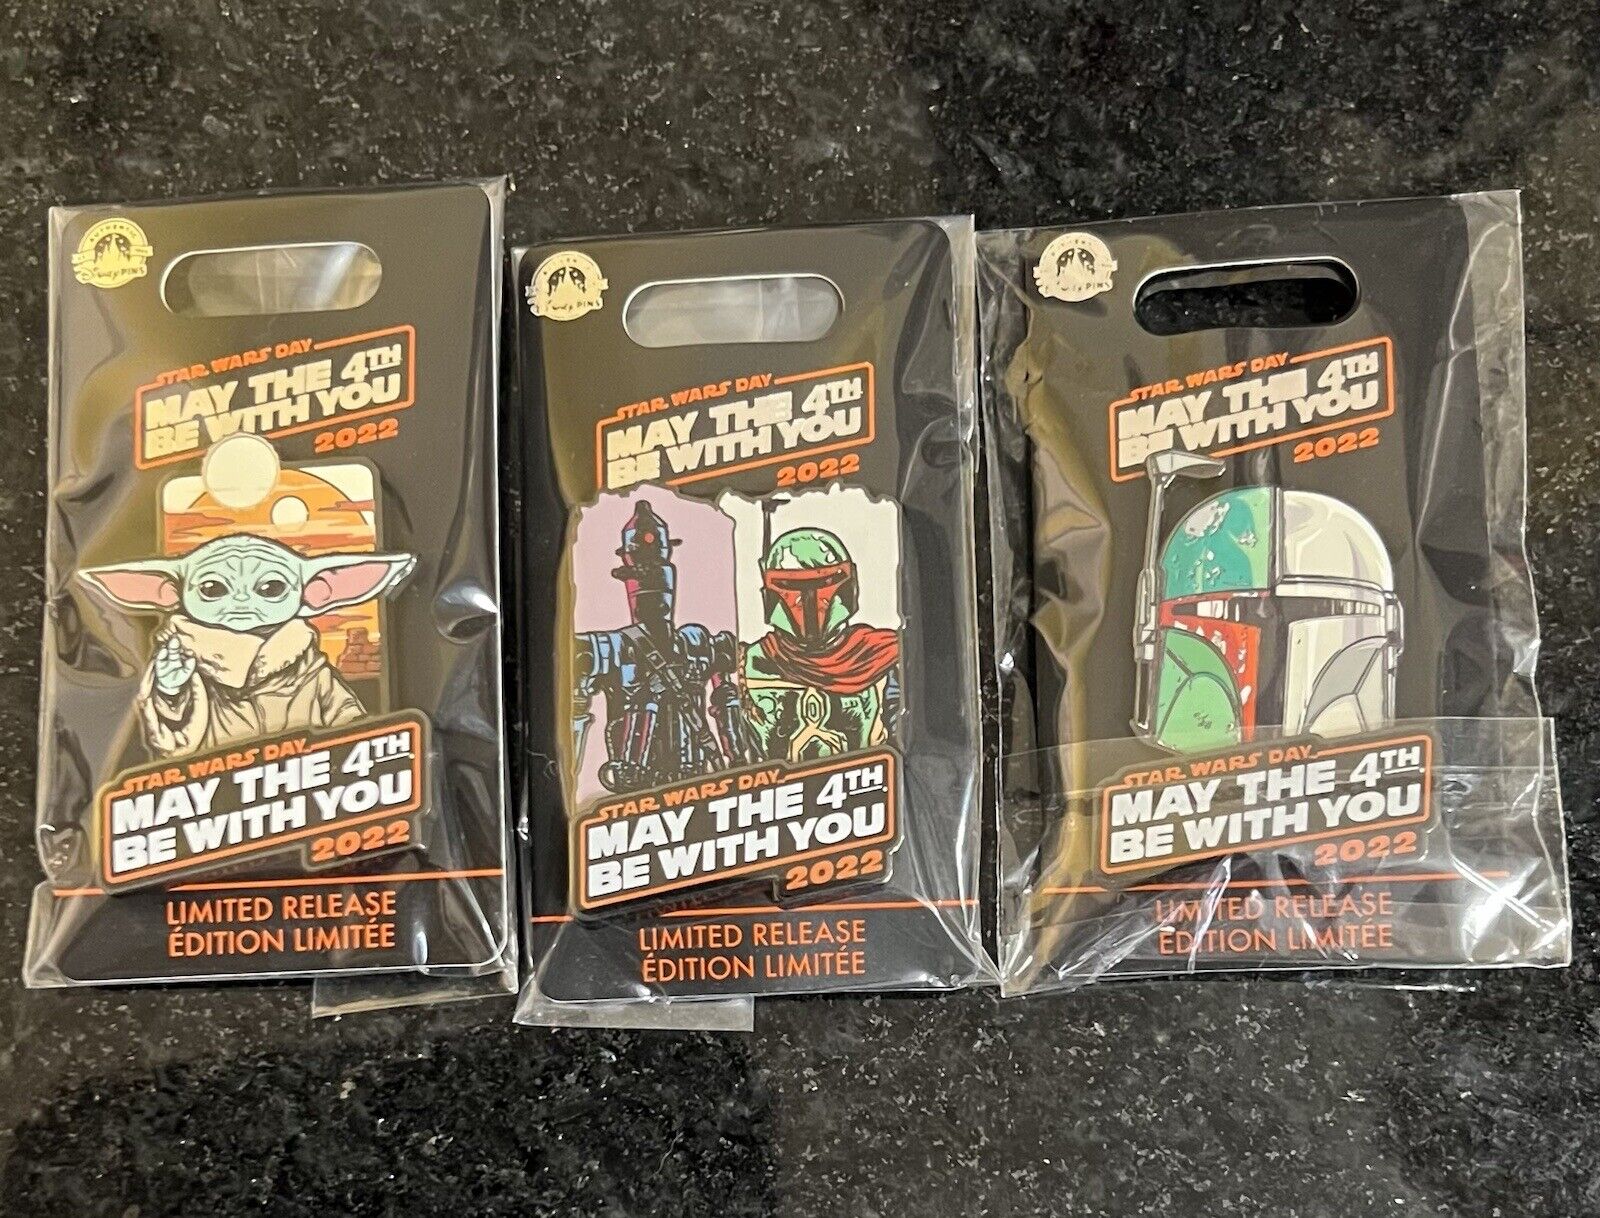 Disney Star Wars 2022 May the Fourth Be with You Pin Set LR Grogu Boba Fett IG88